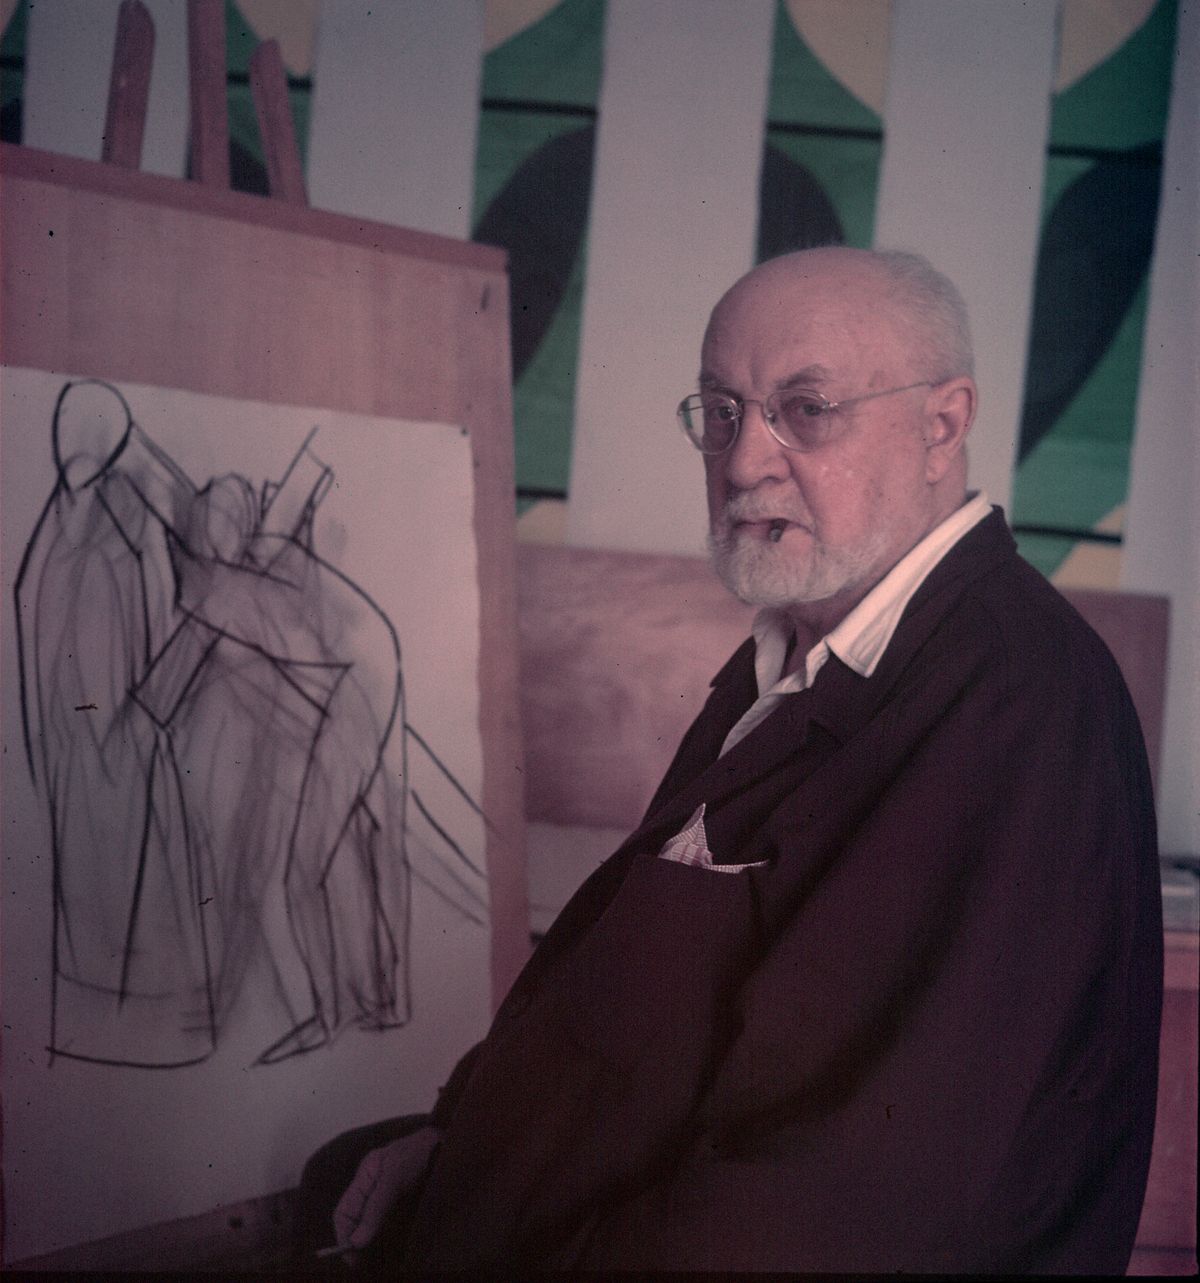 Henri Matisse: His Final Years and Exhibit